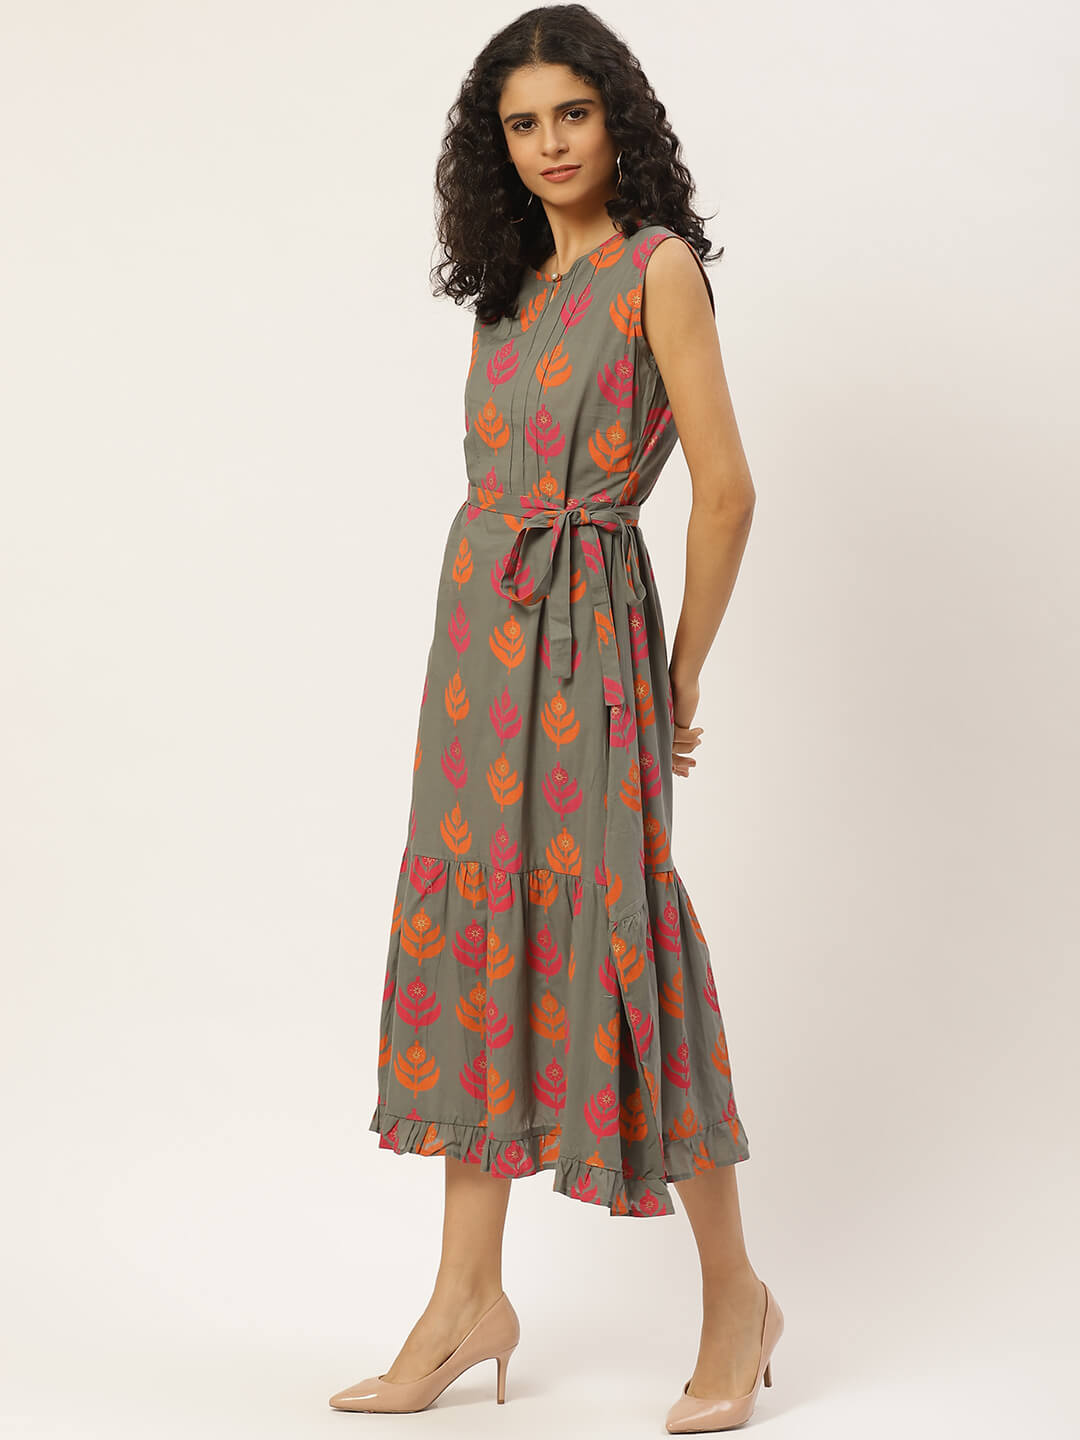 Cotton printed Dress for women 